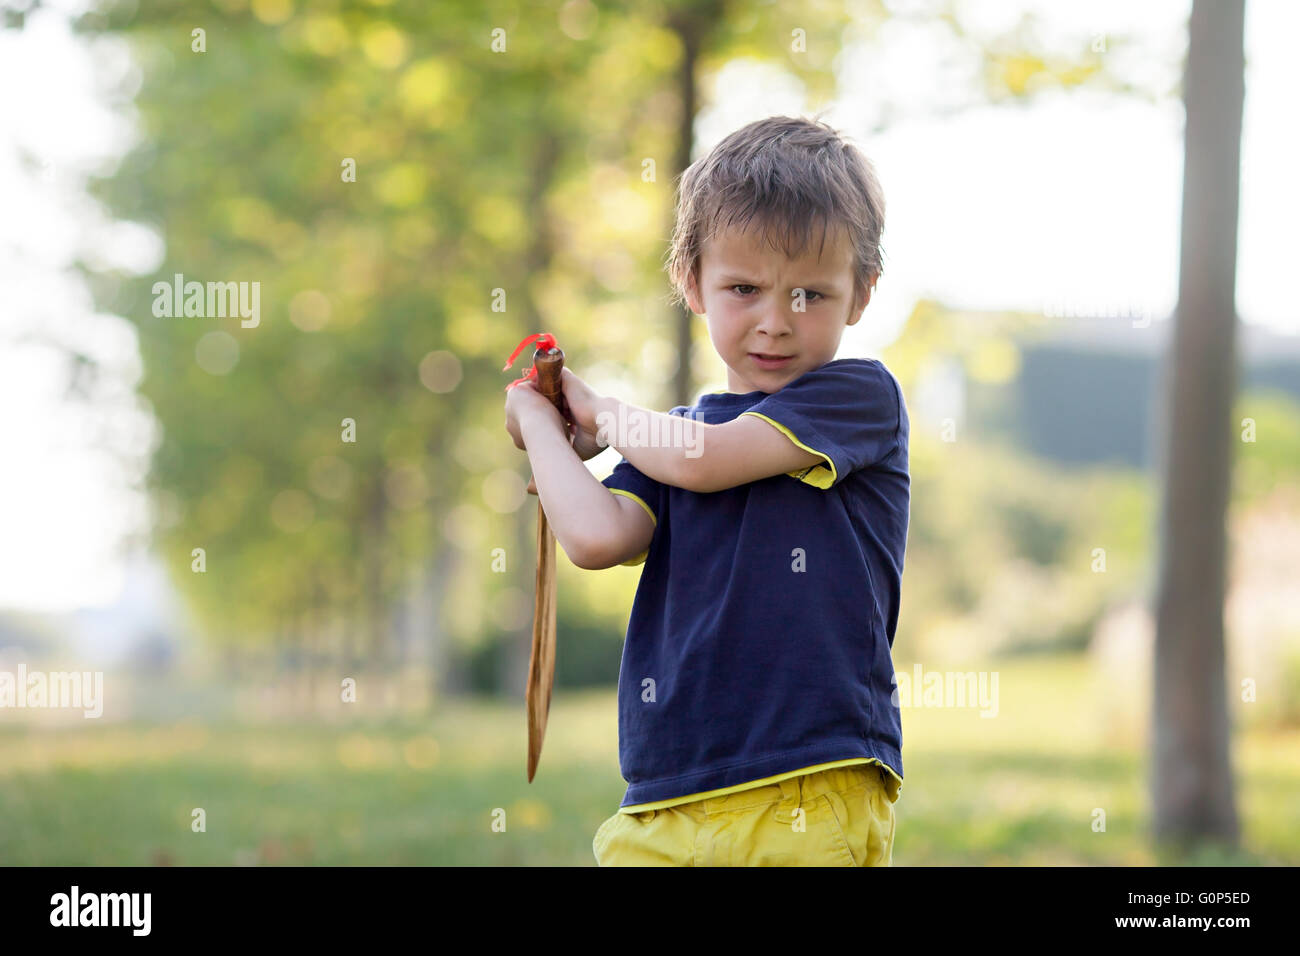 Angry little boy, holding sword, glaring with a mad face at the camera, outdoors in the park Stock Photo